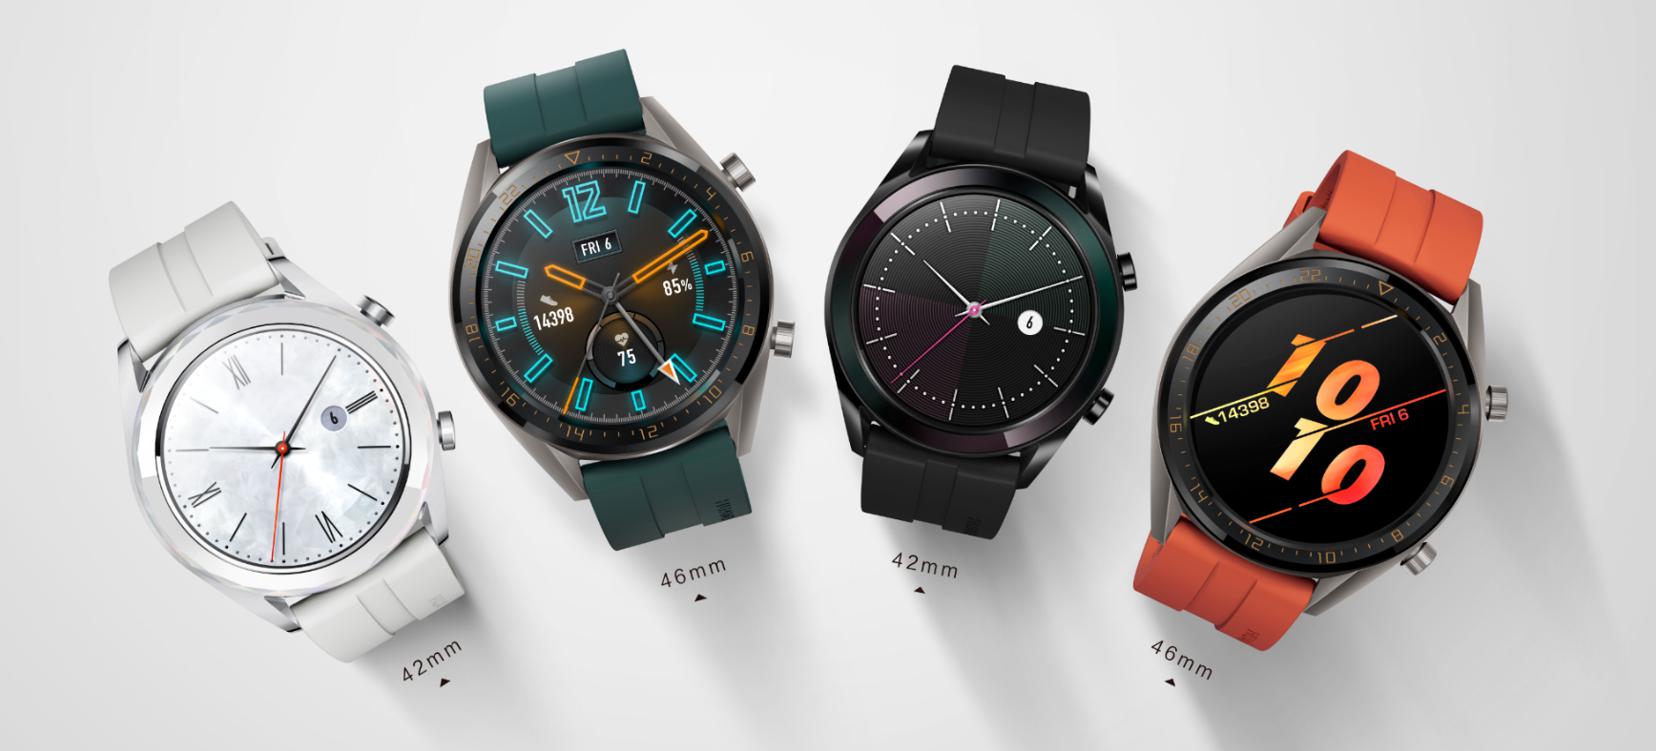 Huawei Adds Actives and Elegant Editions to HUAWEI WATCH GT Line Up